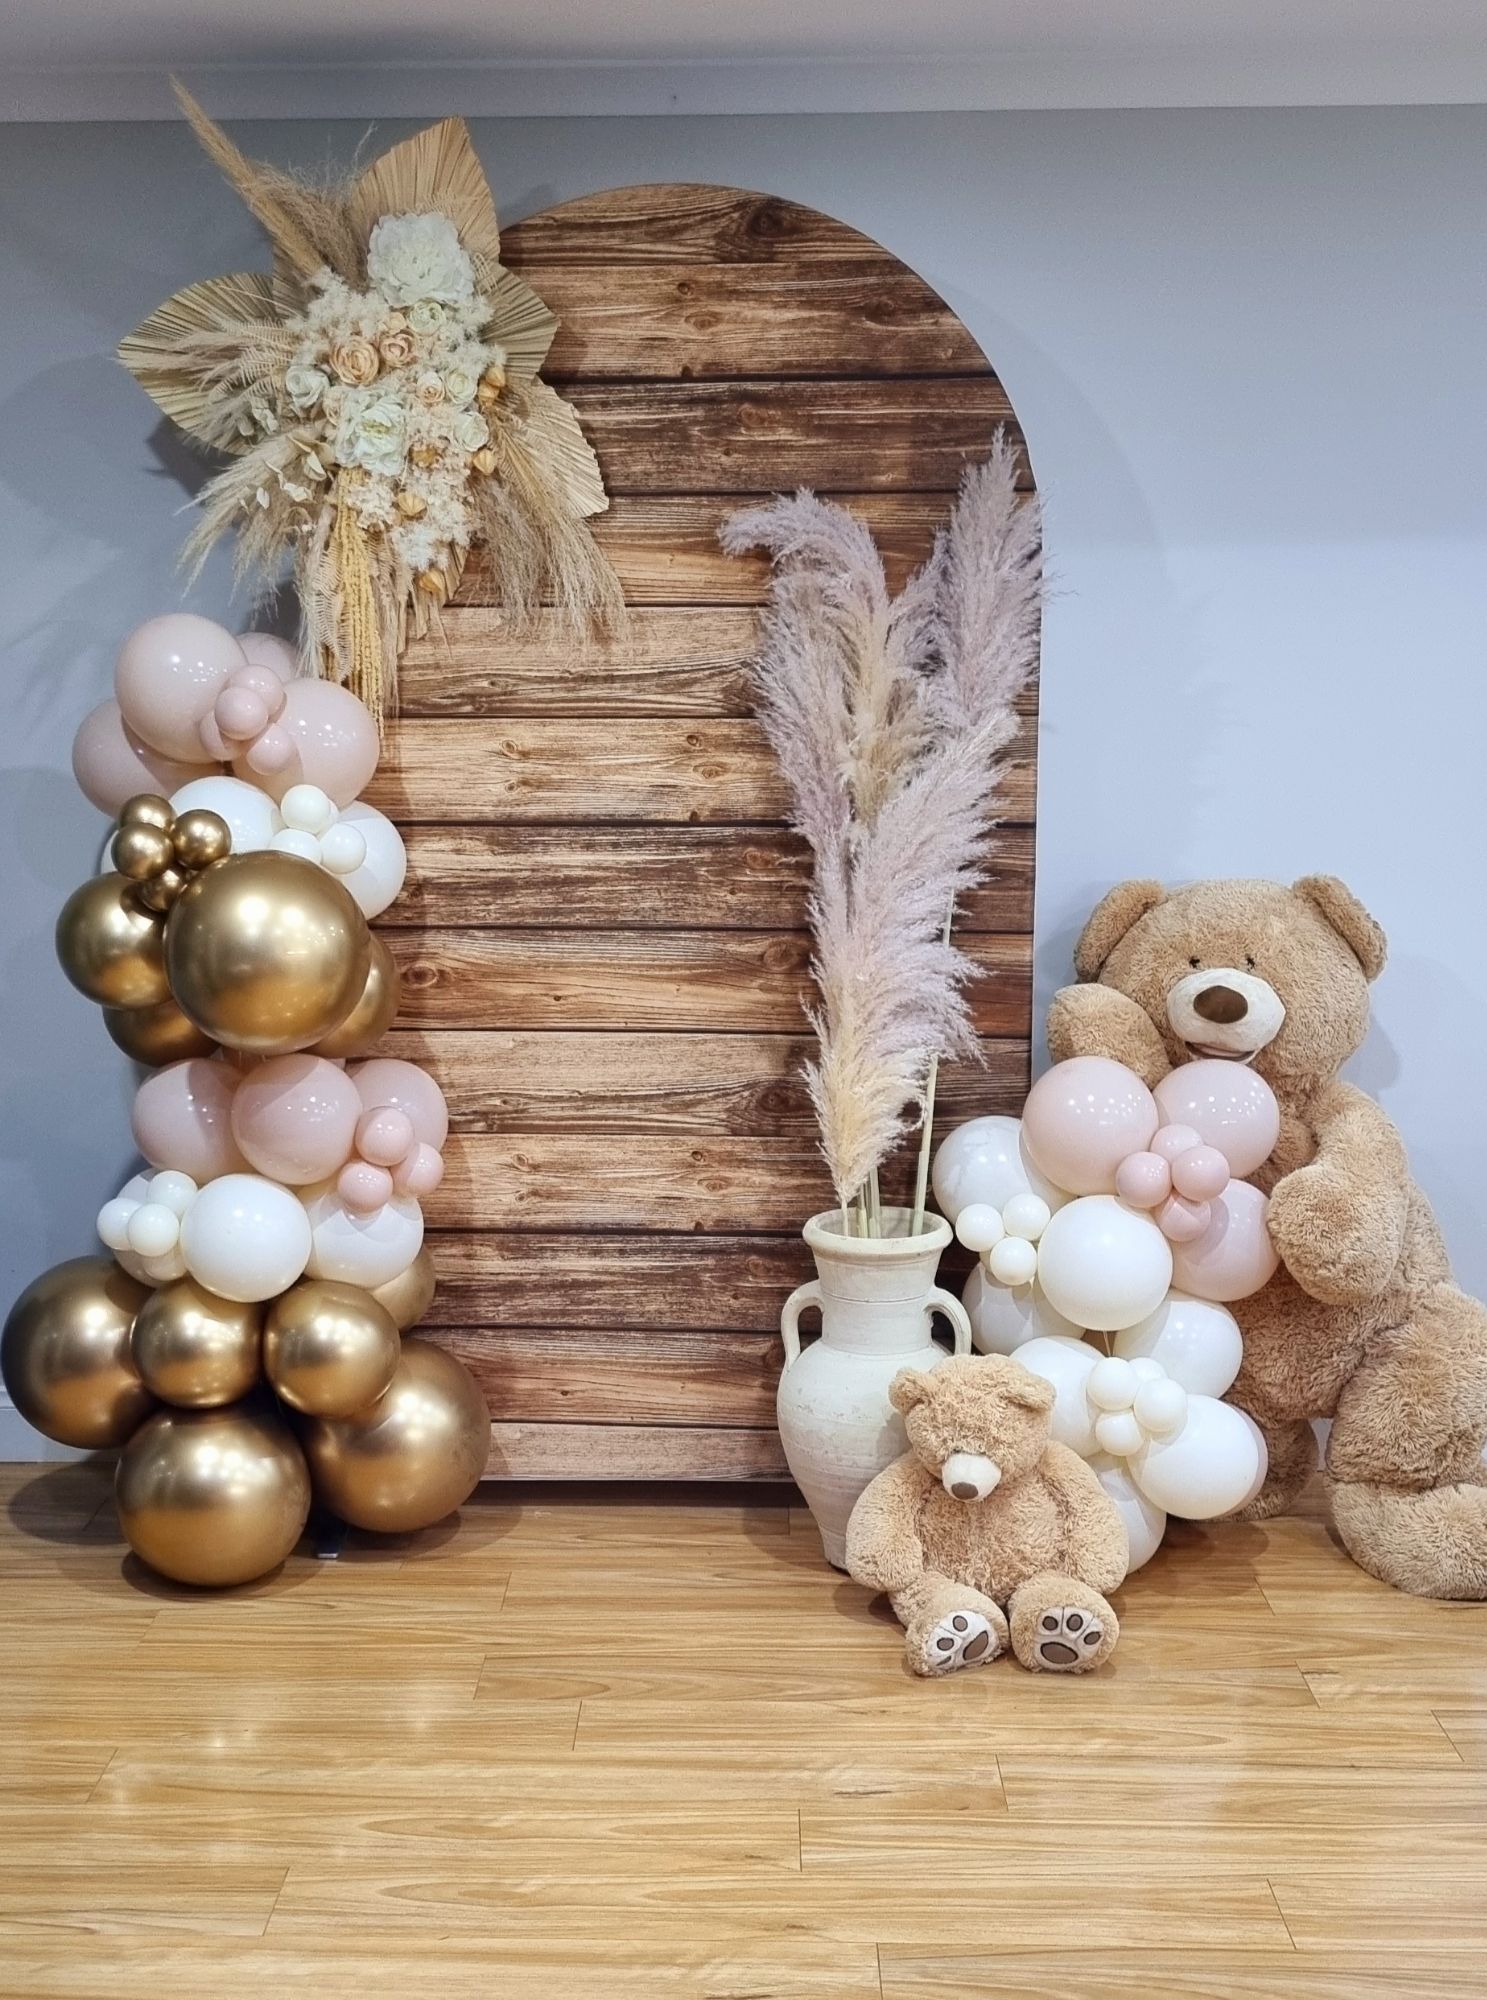 Wooden Arch backdrop
Artificial floral arrangement
Balloon Garland
Large and Medium Teddy Bear
Urn with Pampus grass
Delivery and styling within 40kms $400